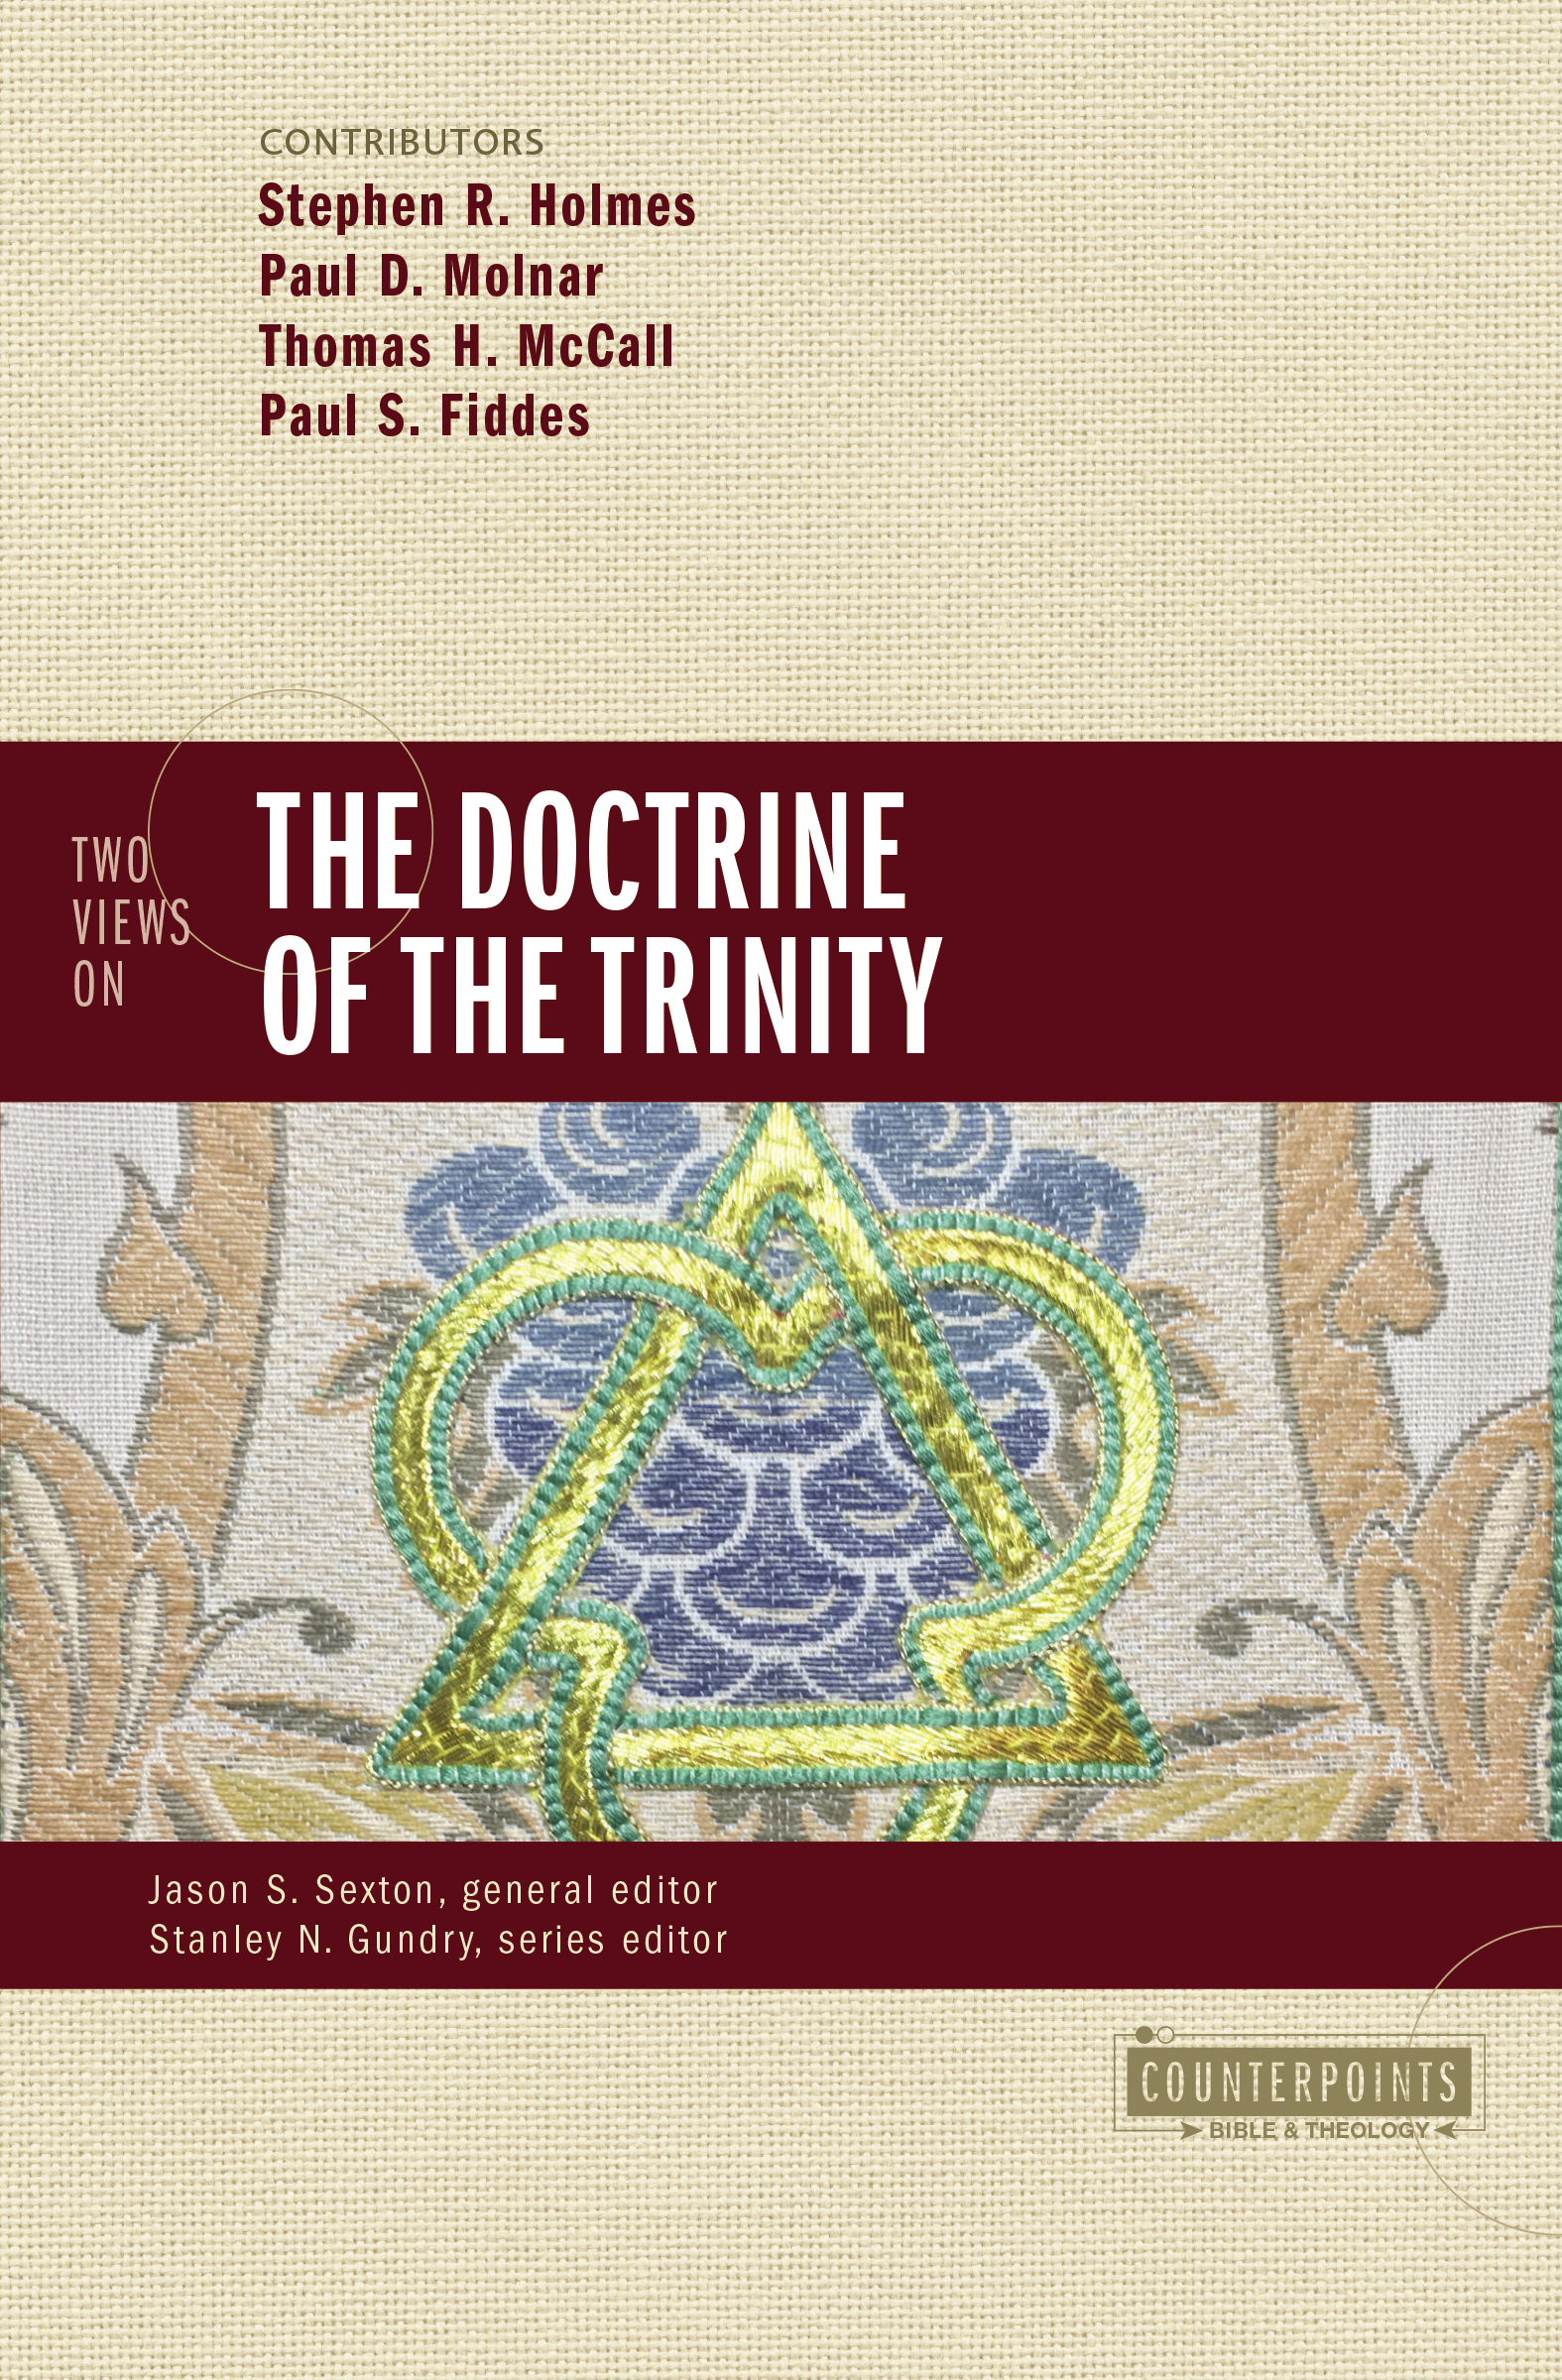 Two Views on the Doctrine of the Trinity